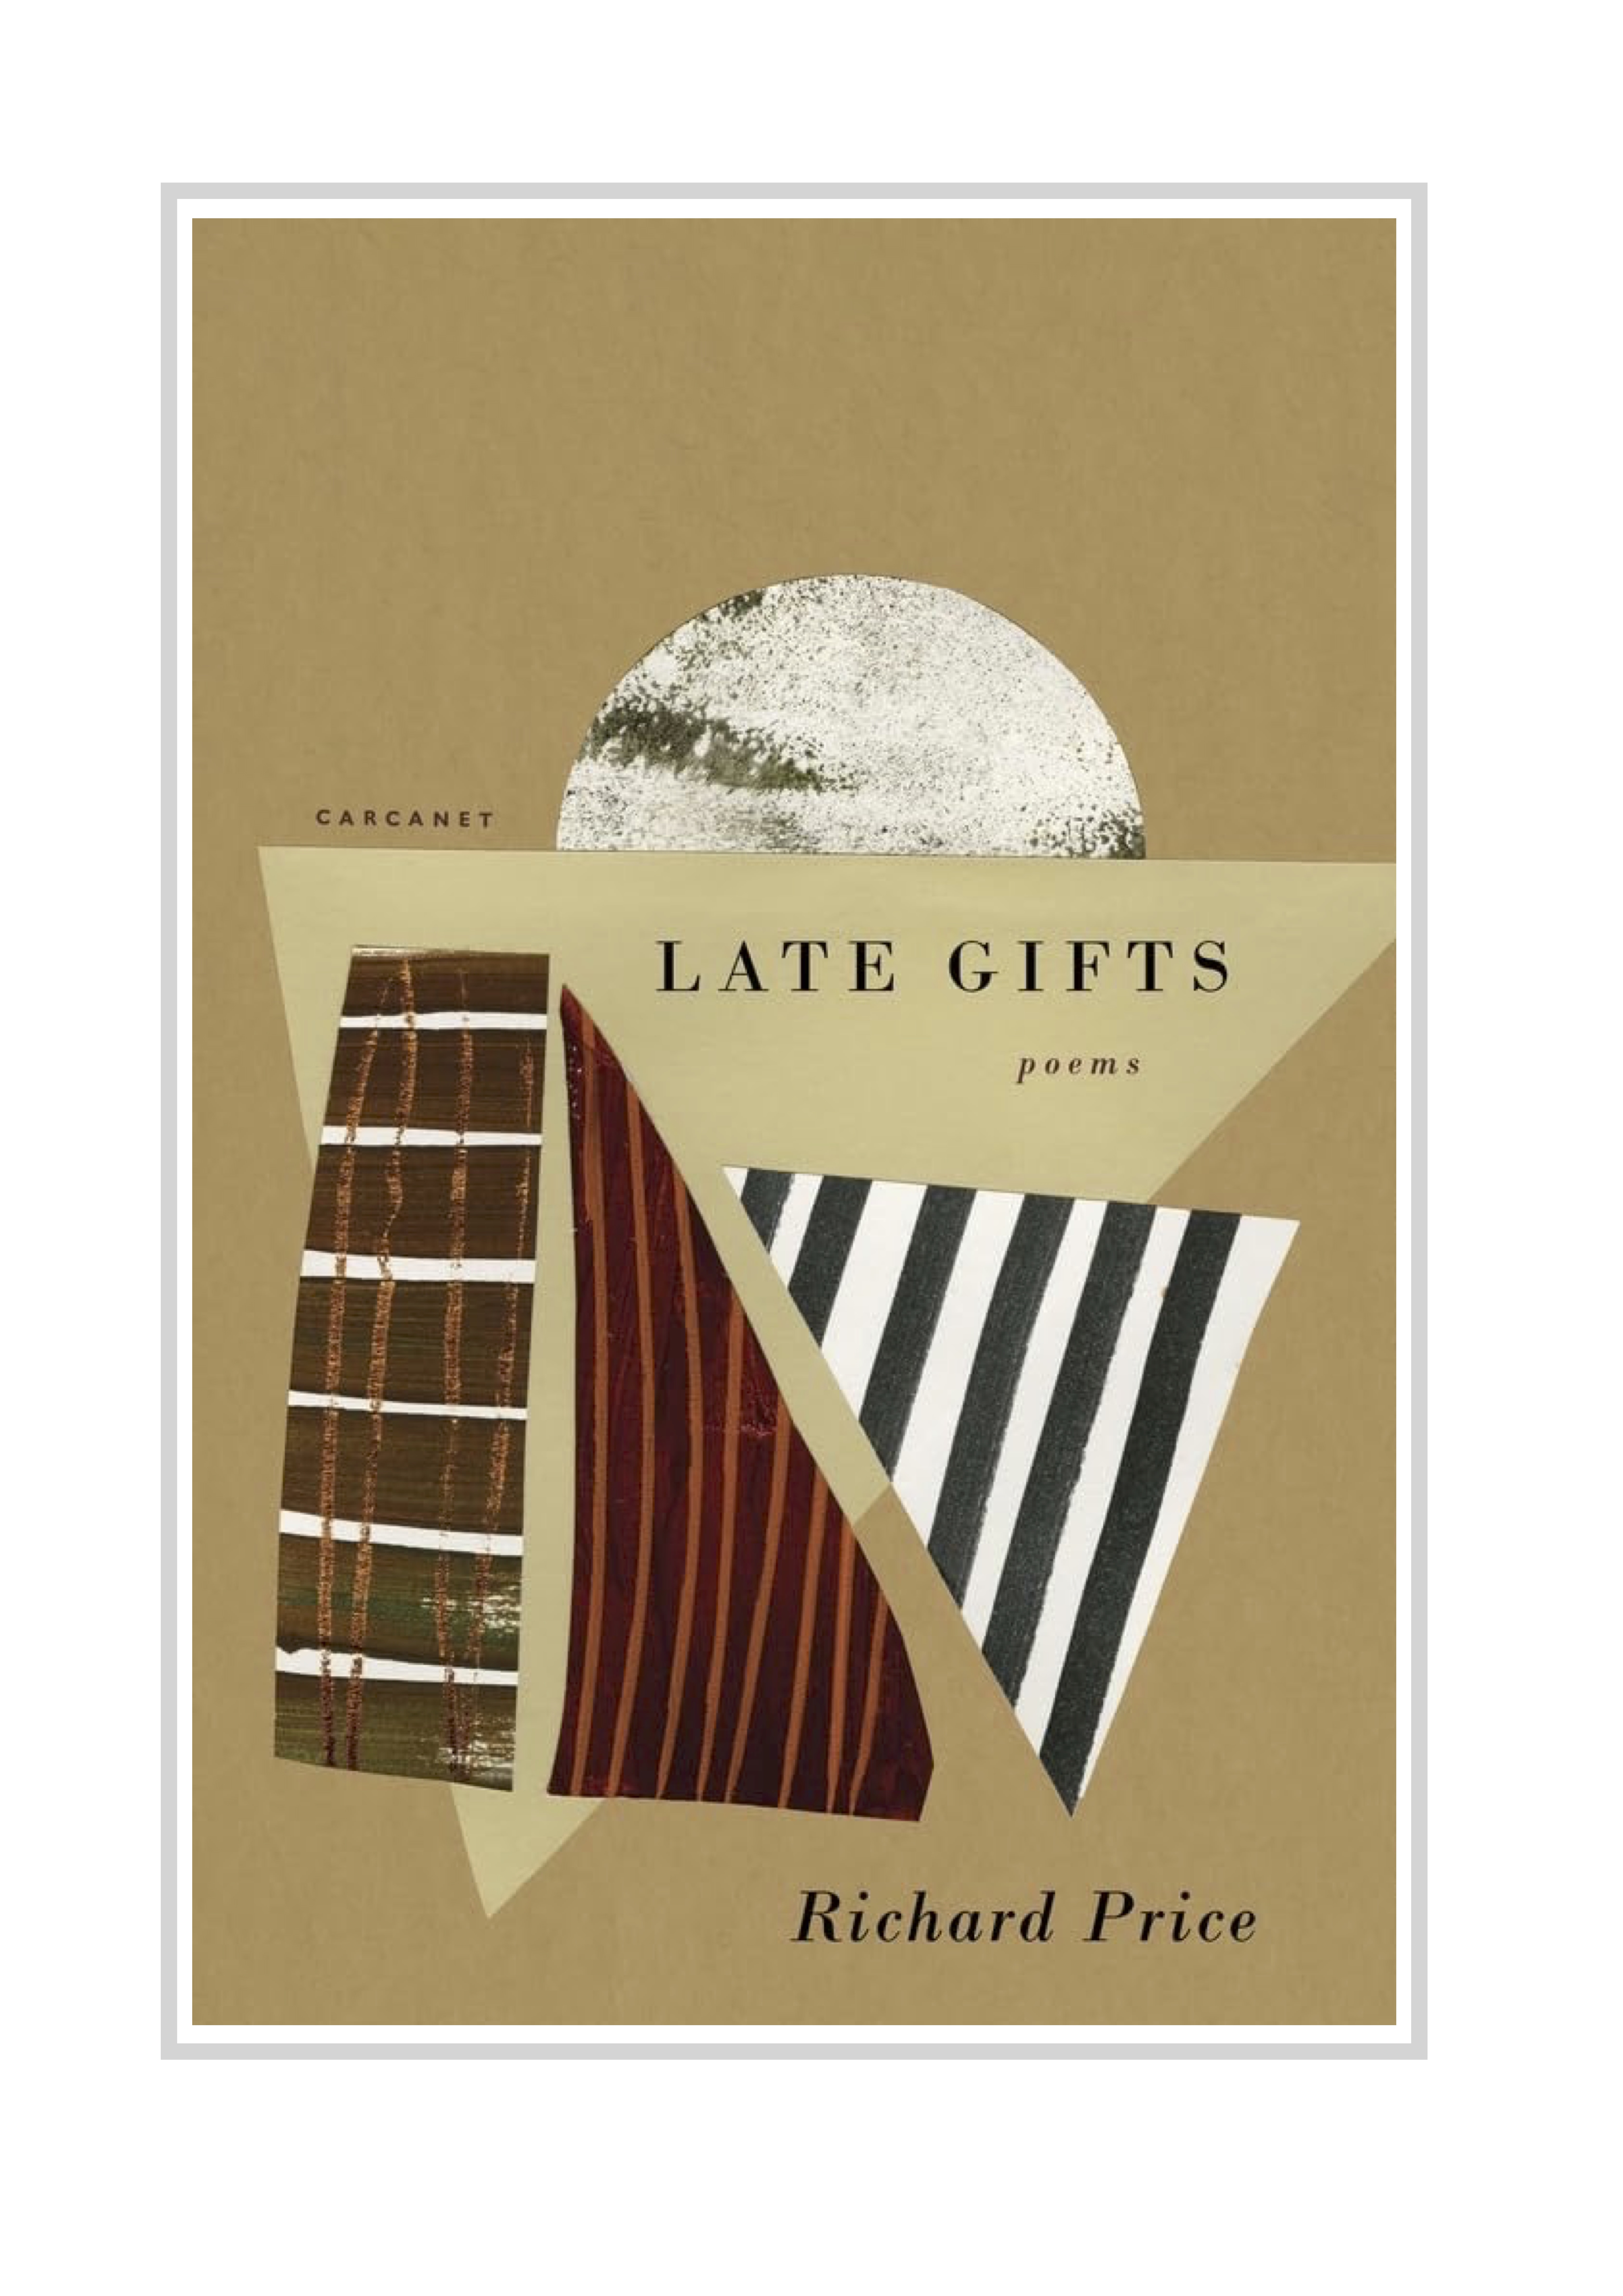 WITNESS OR CONFESSION: On ‘Lucky Day’ and ‘Late Gifts’ by Richard Price